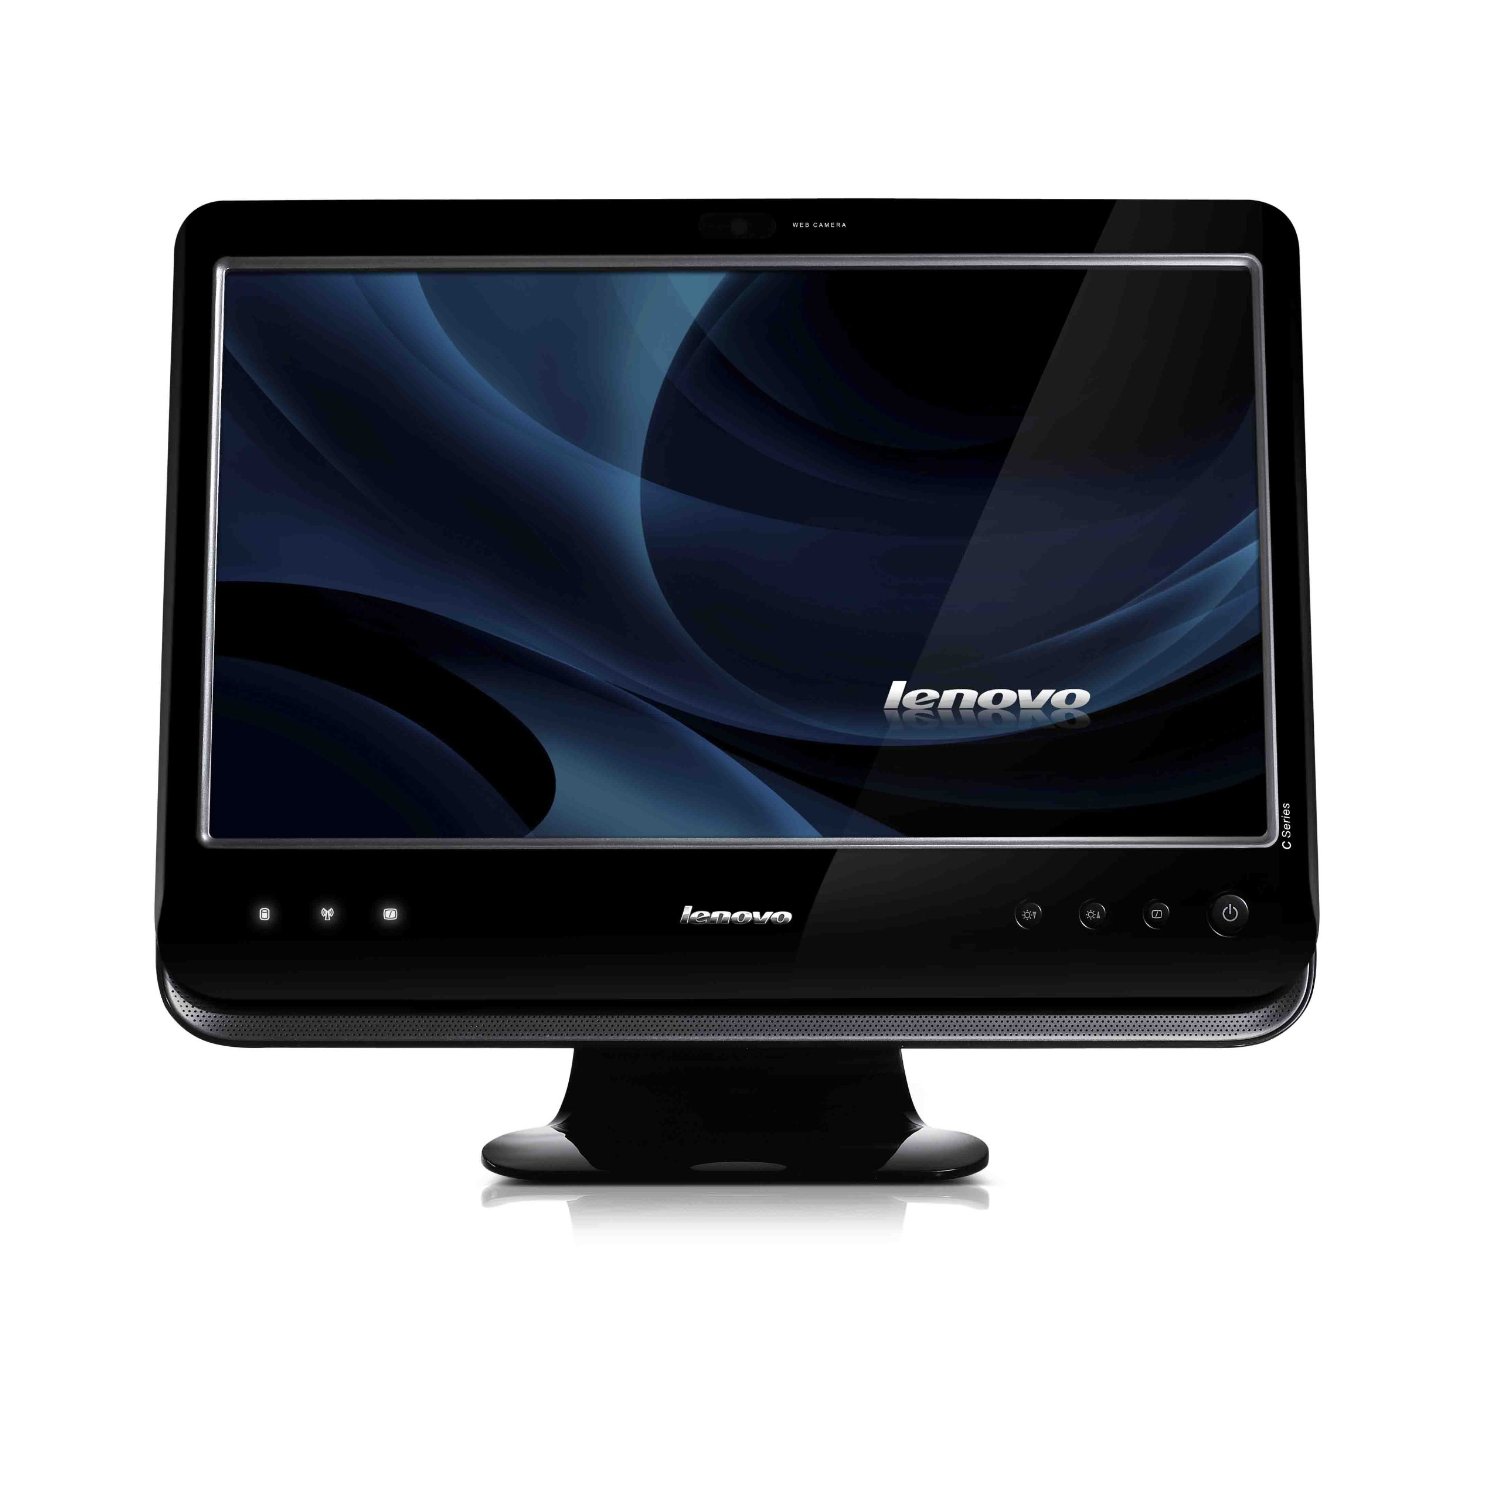 you have lenovo c200 all in one desktop review all devices that